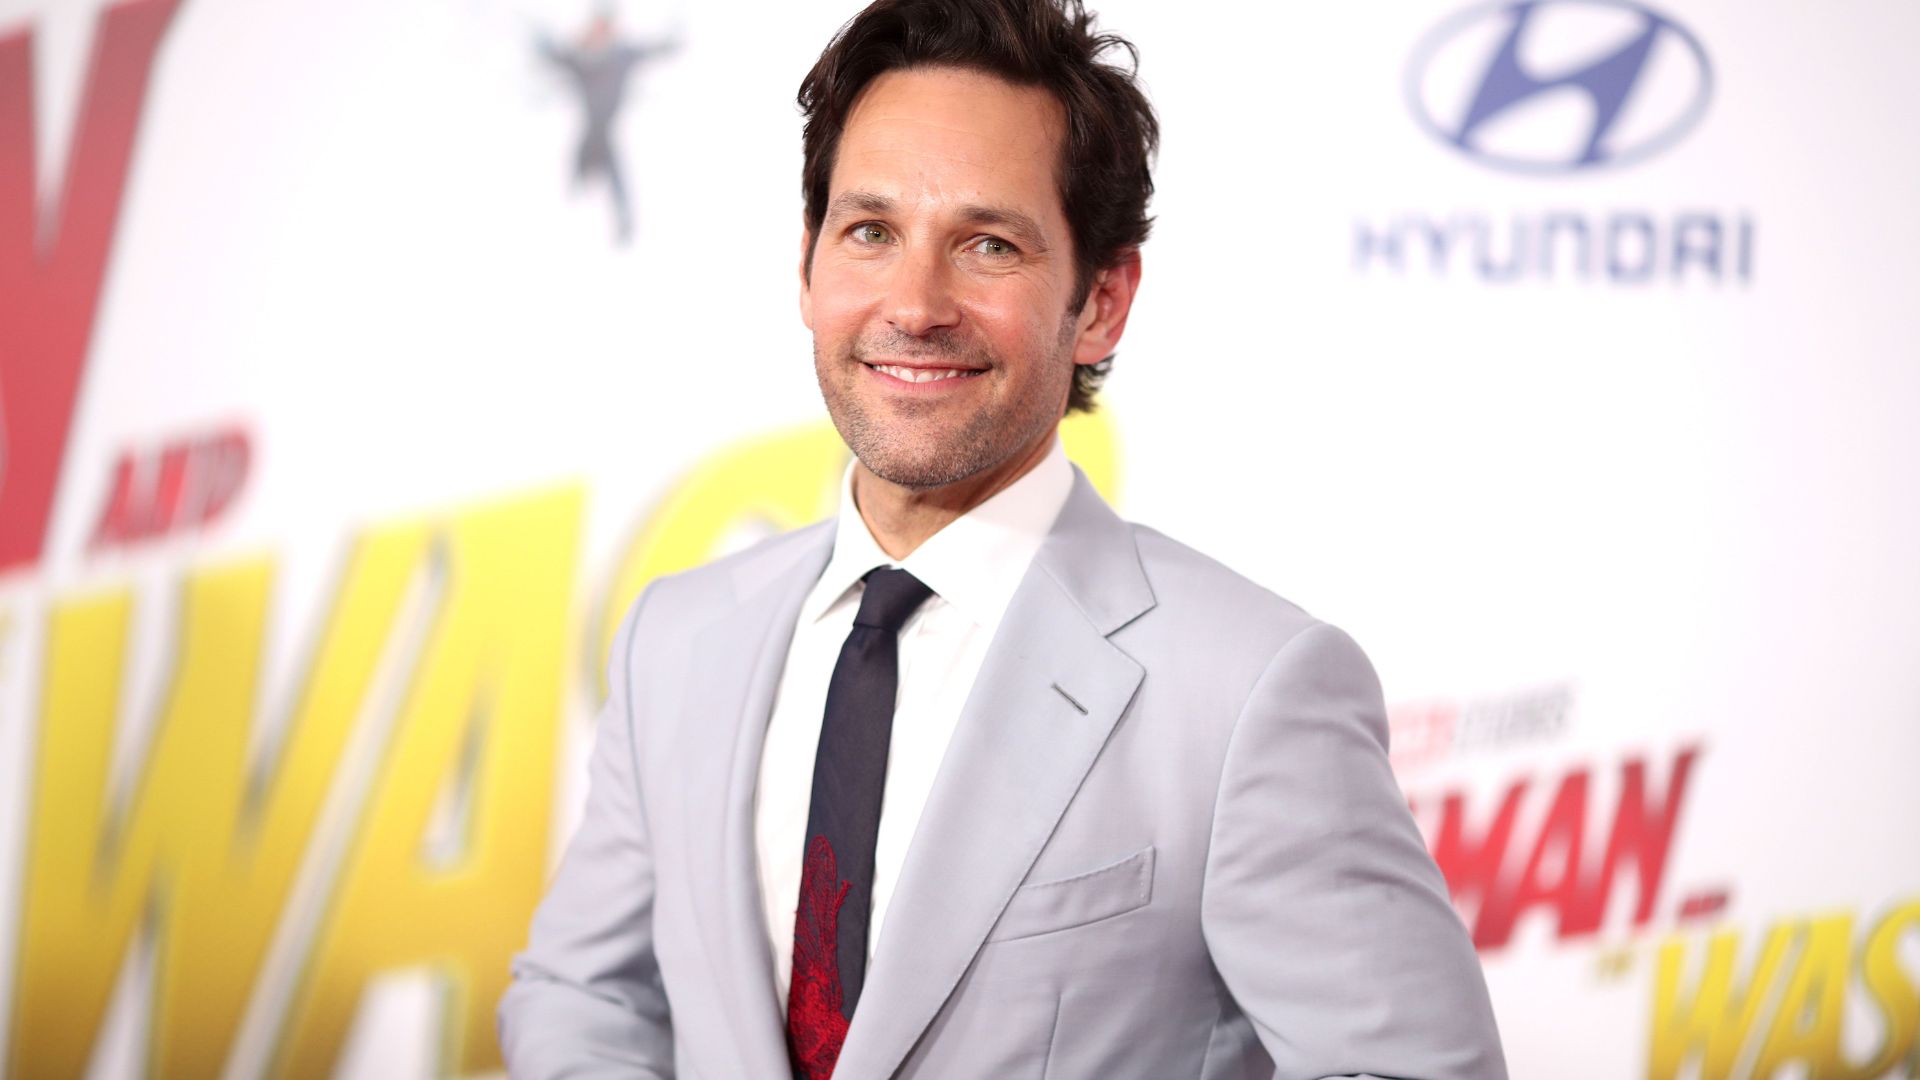 Paul Rudd With A Smile On His Face